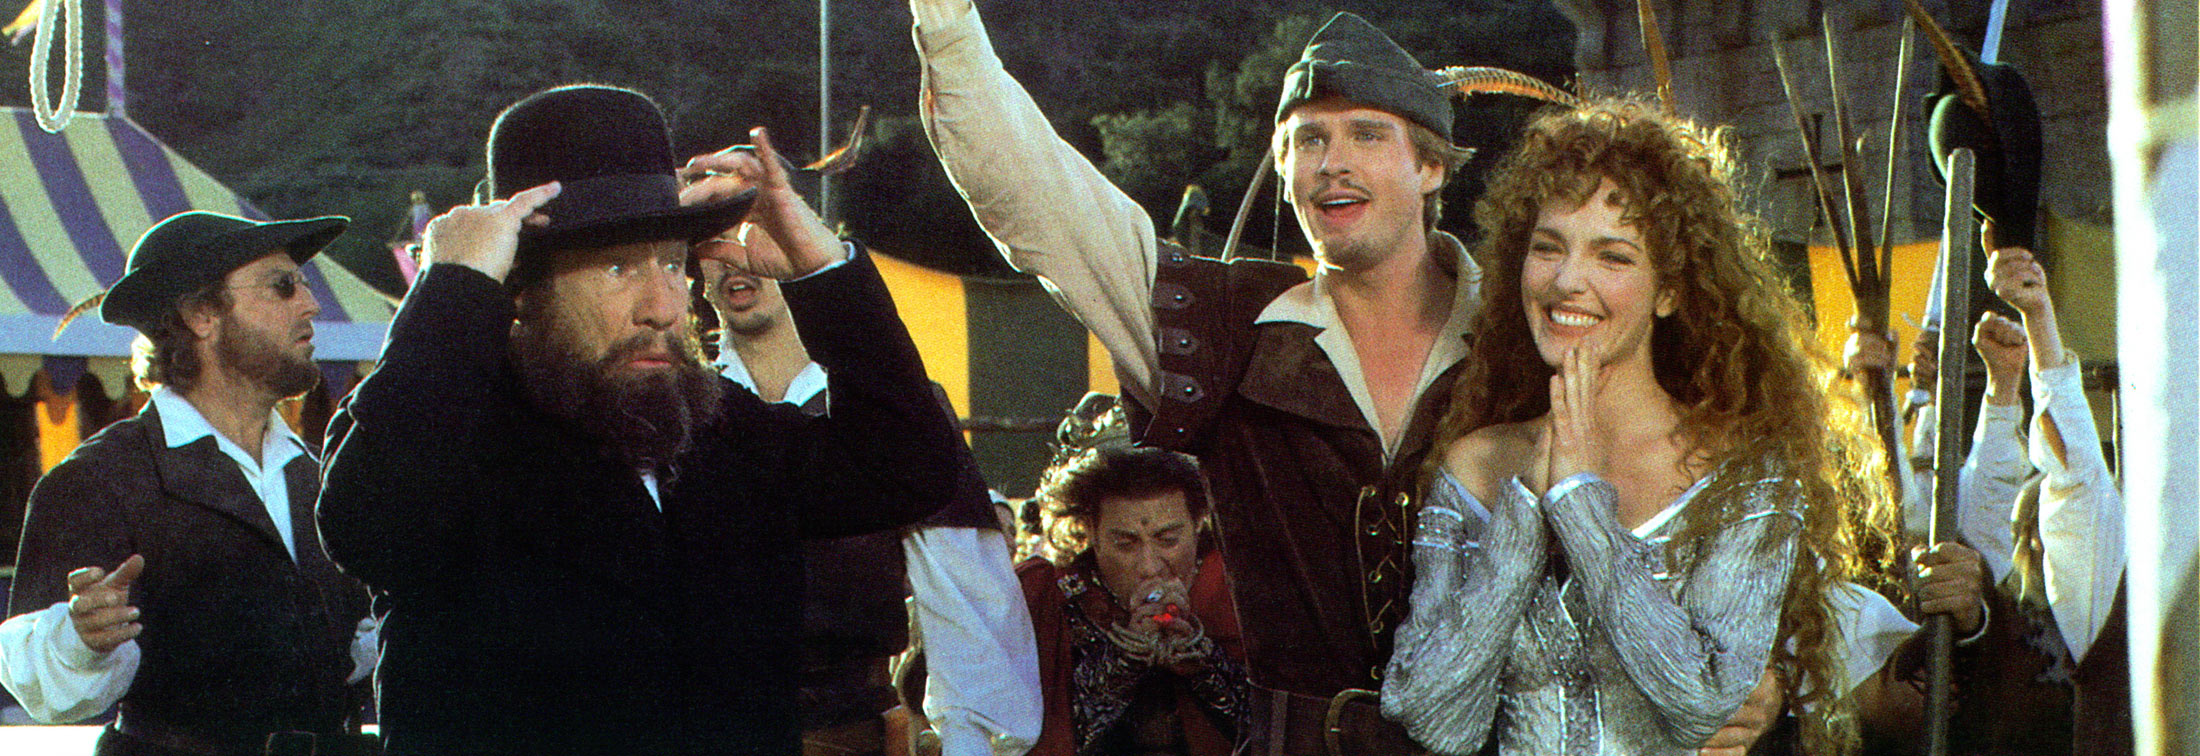 Robin Hood: Men in Tights - A love letter to Mel Brooks on the film's 25th anniversary